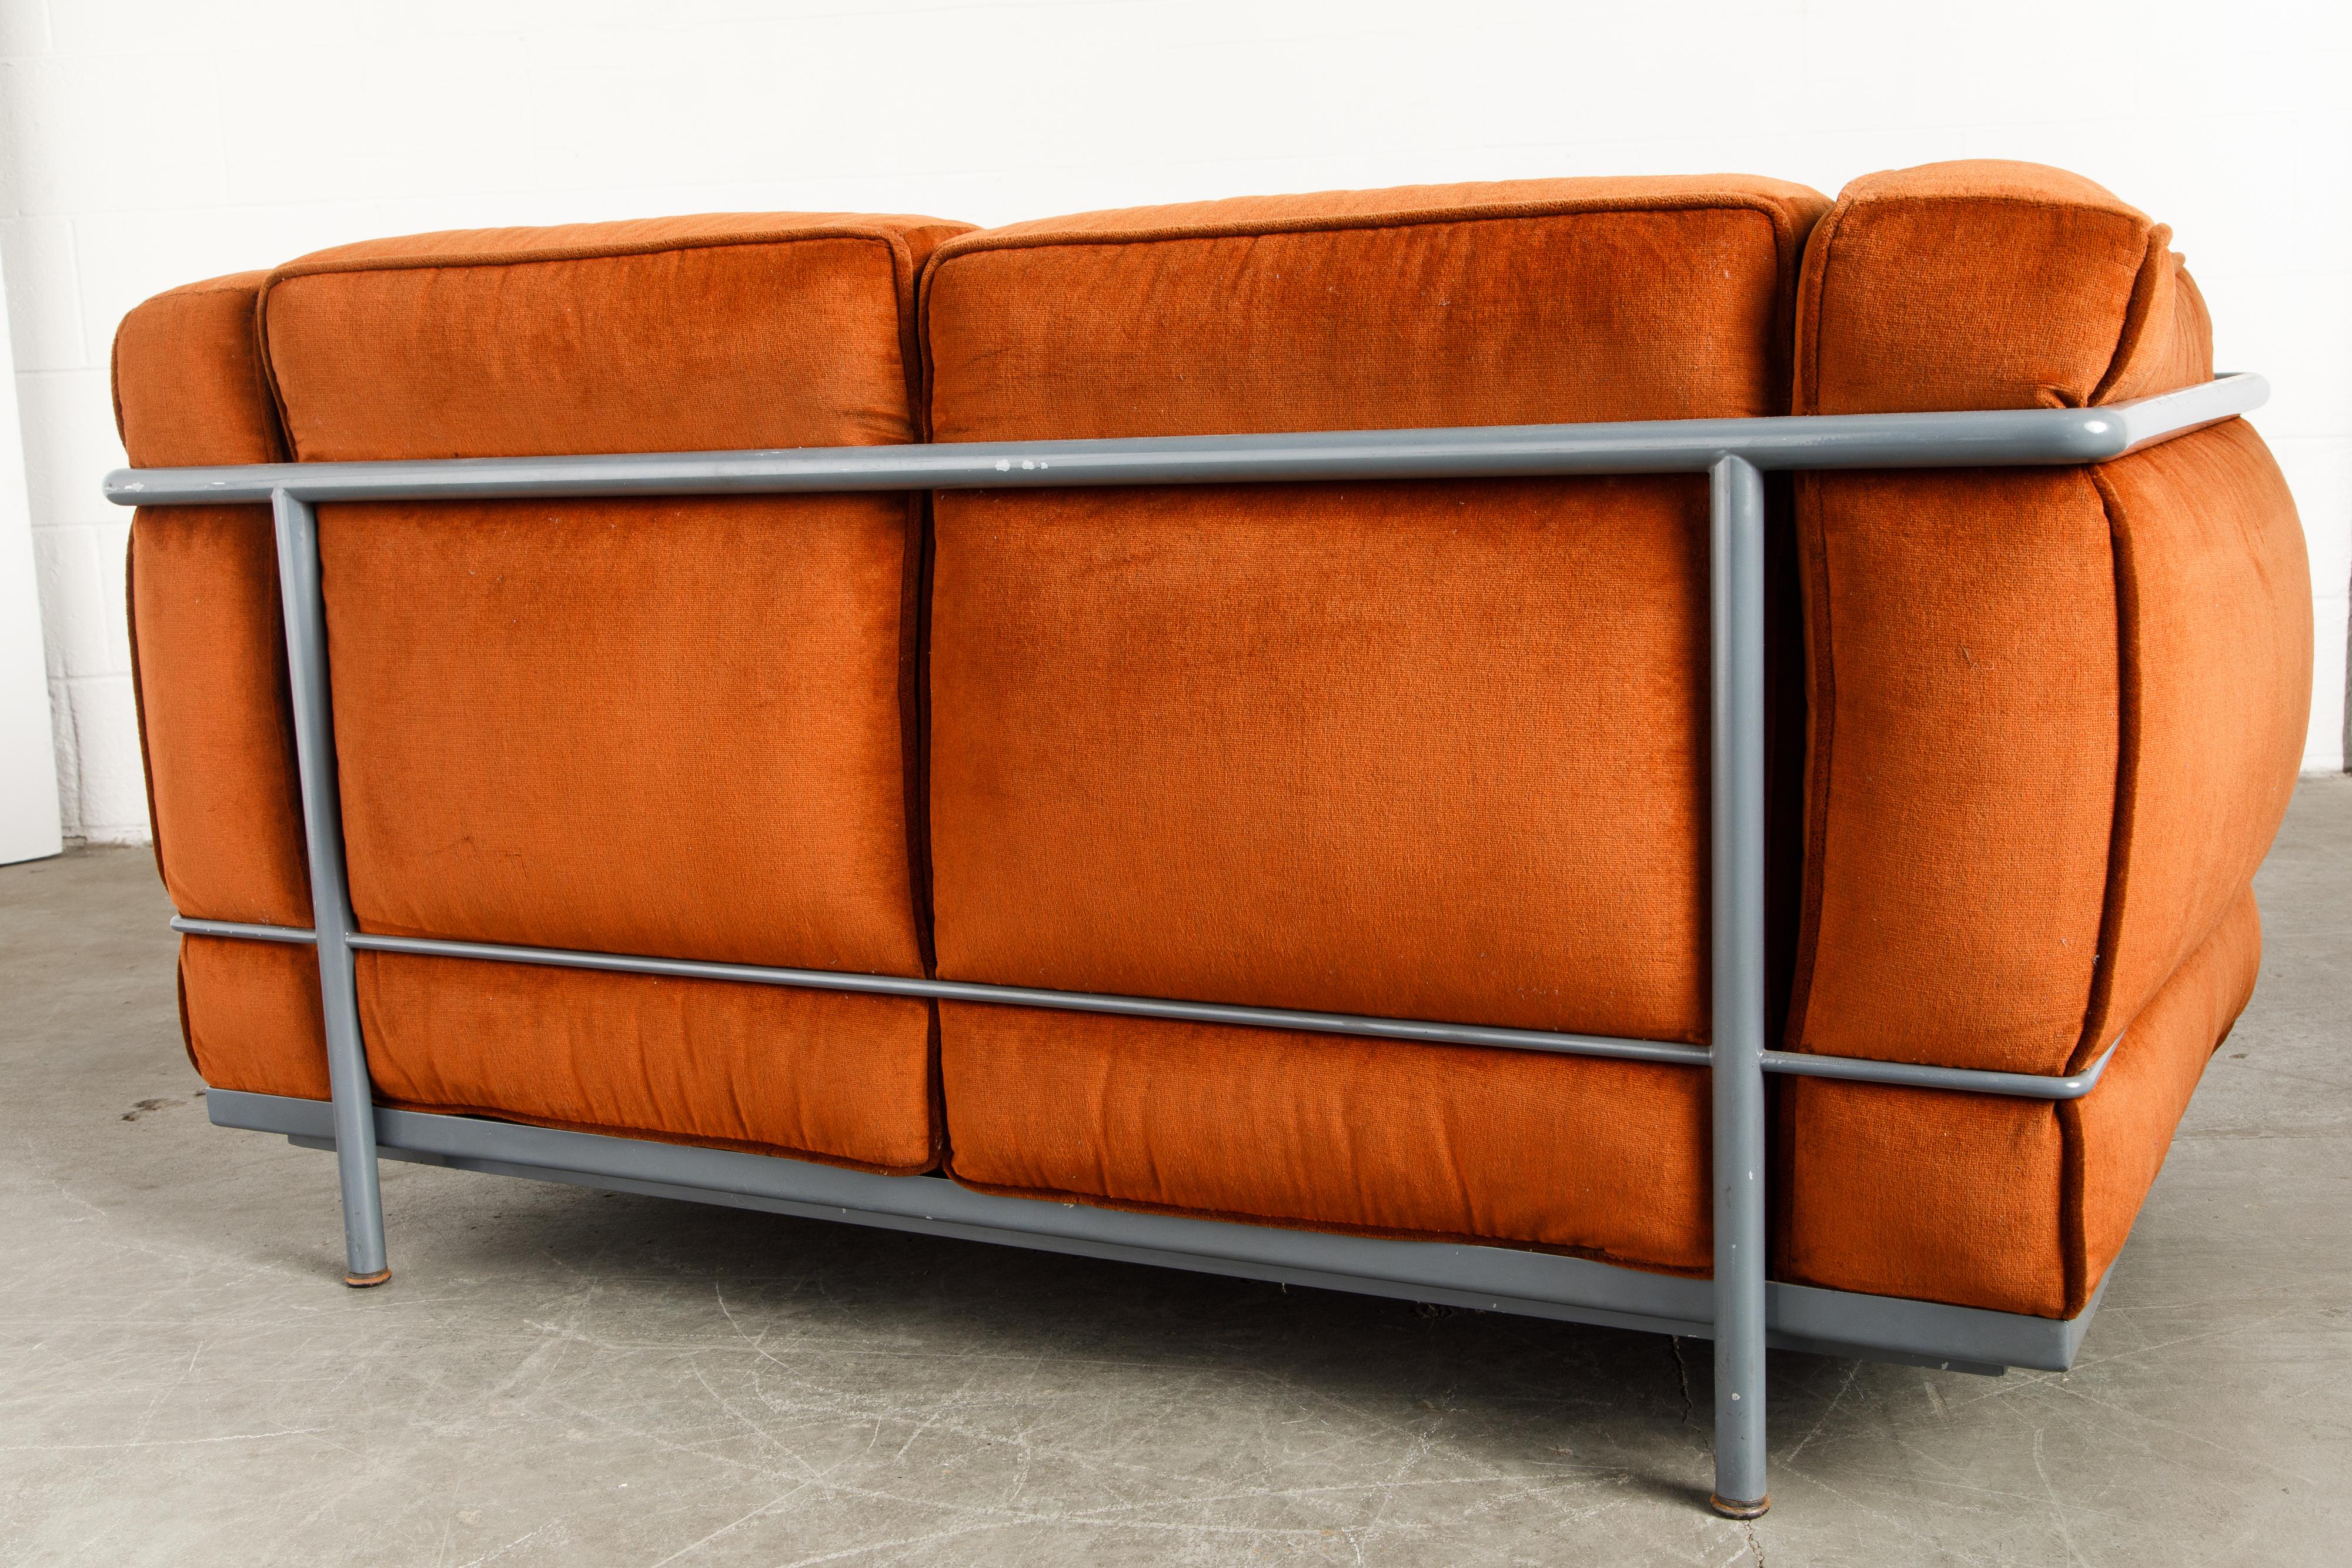 Early Production LC2 Loveseat Sofa by Le Corbusier for Cassina, c. 1965, Signed 8